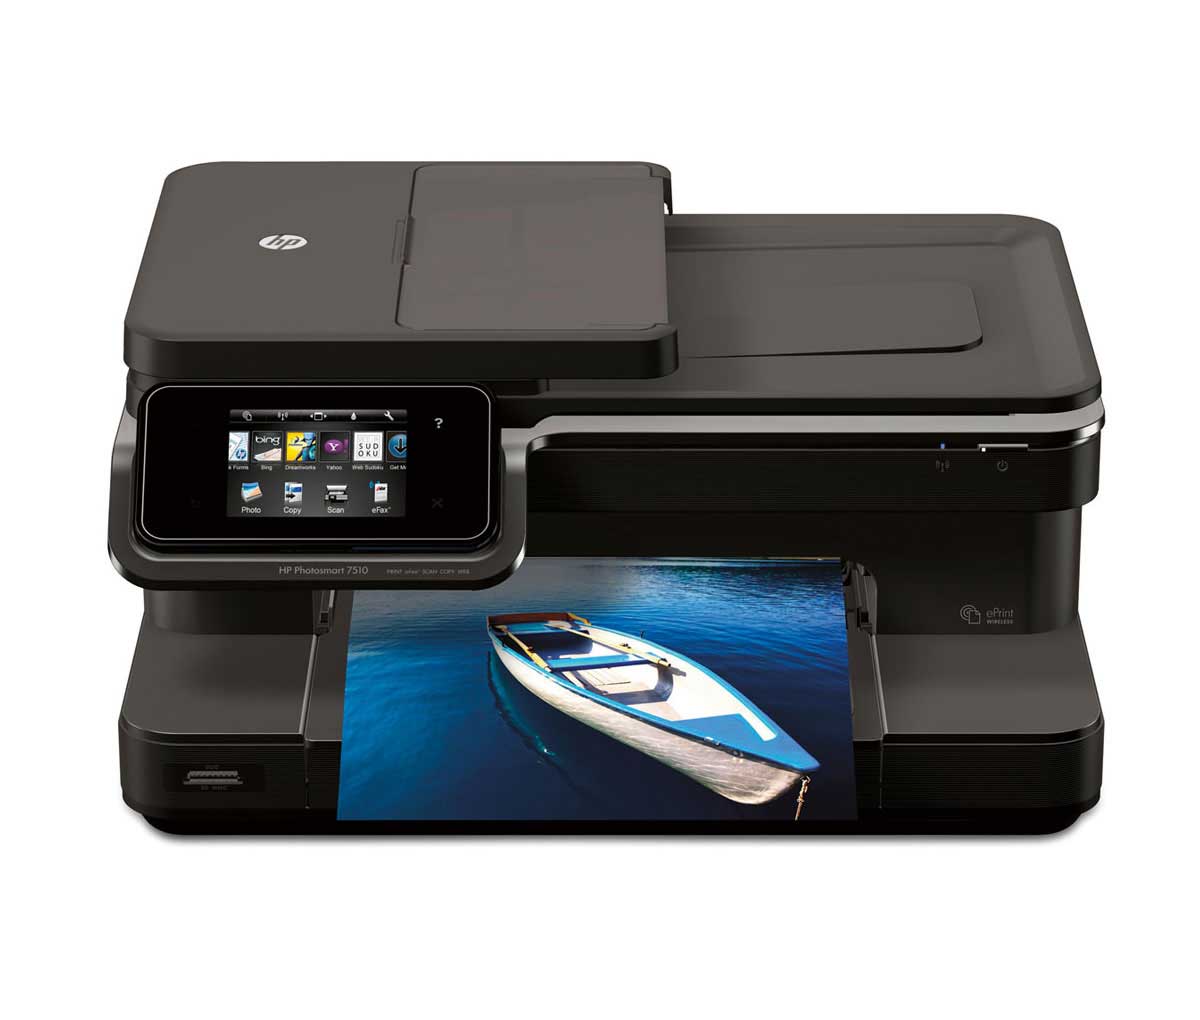 HP Photosmart 7510 e-All-in-One Front View